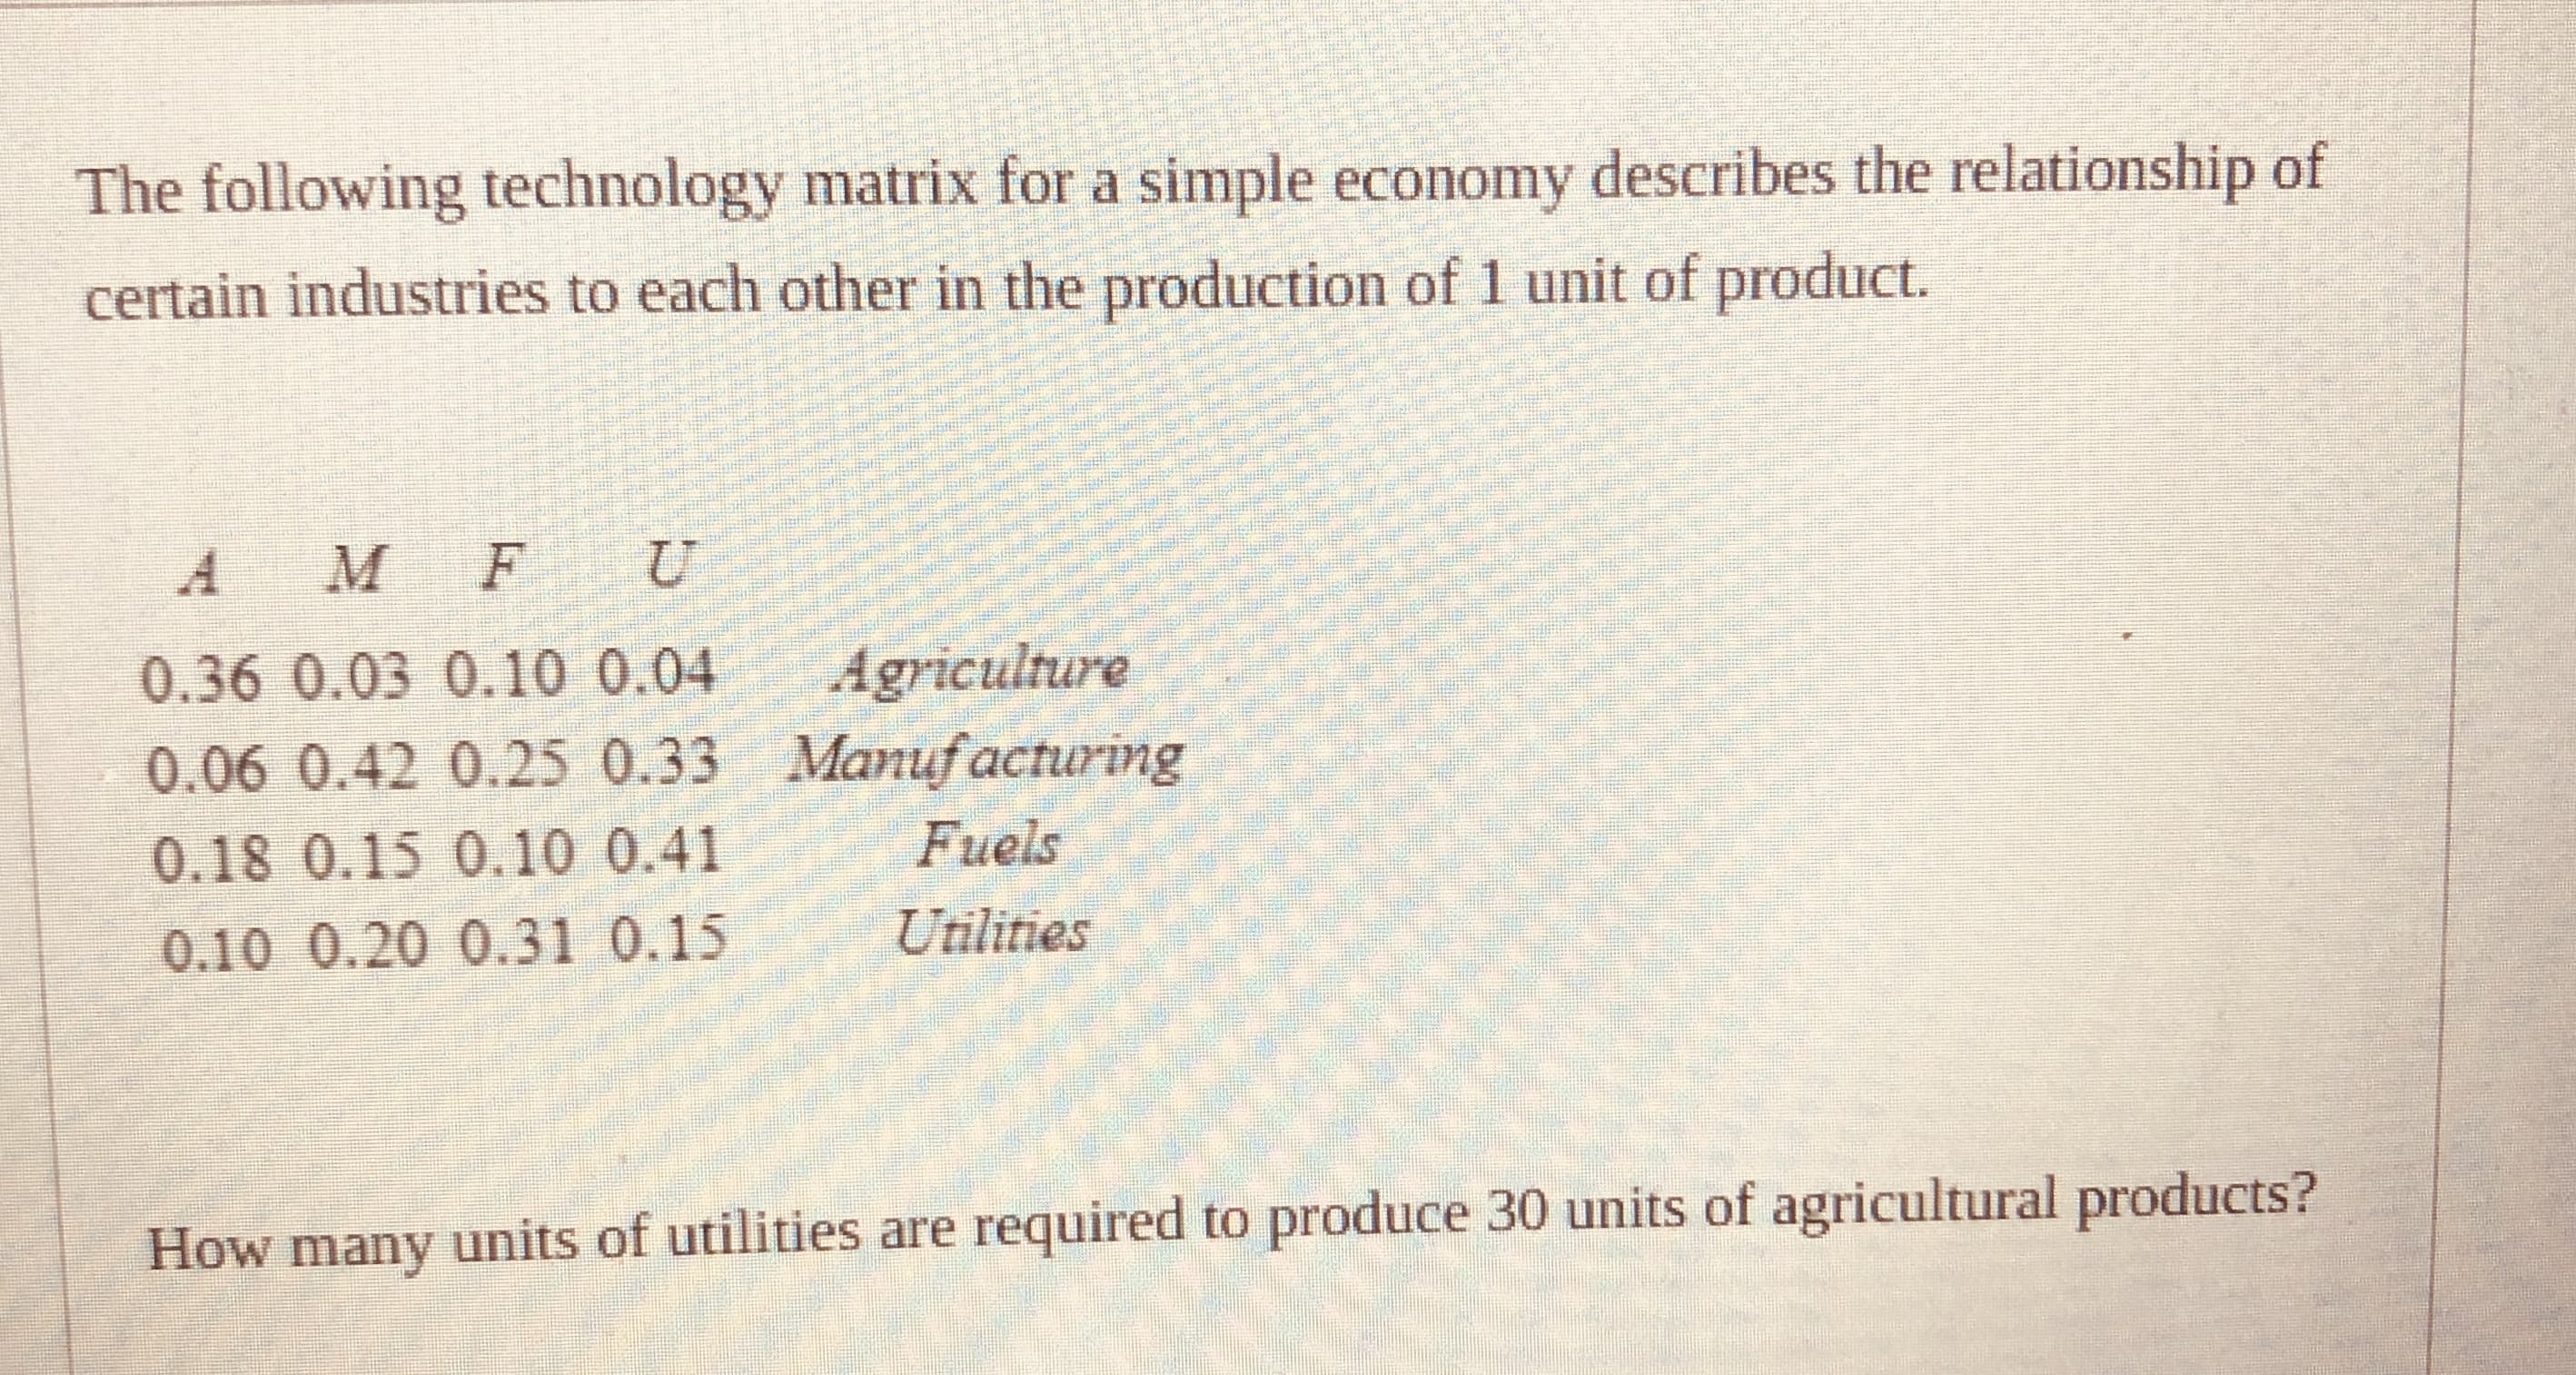 How many units of utilities are
required to produce 30 units of agricultural products?
